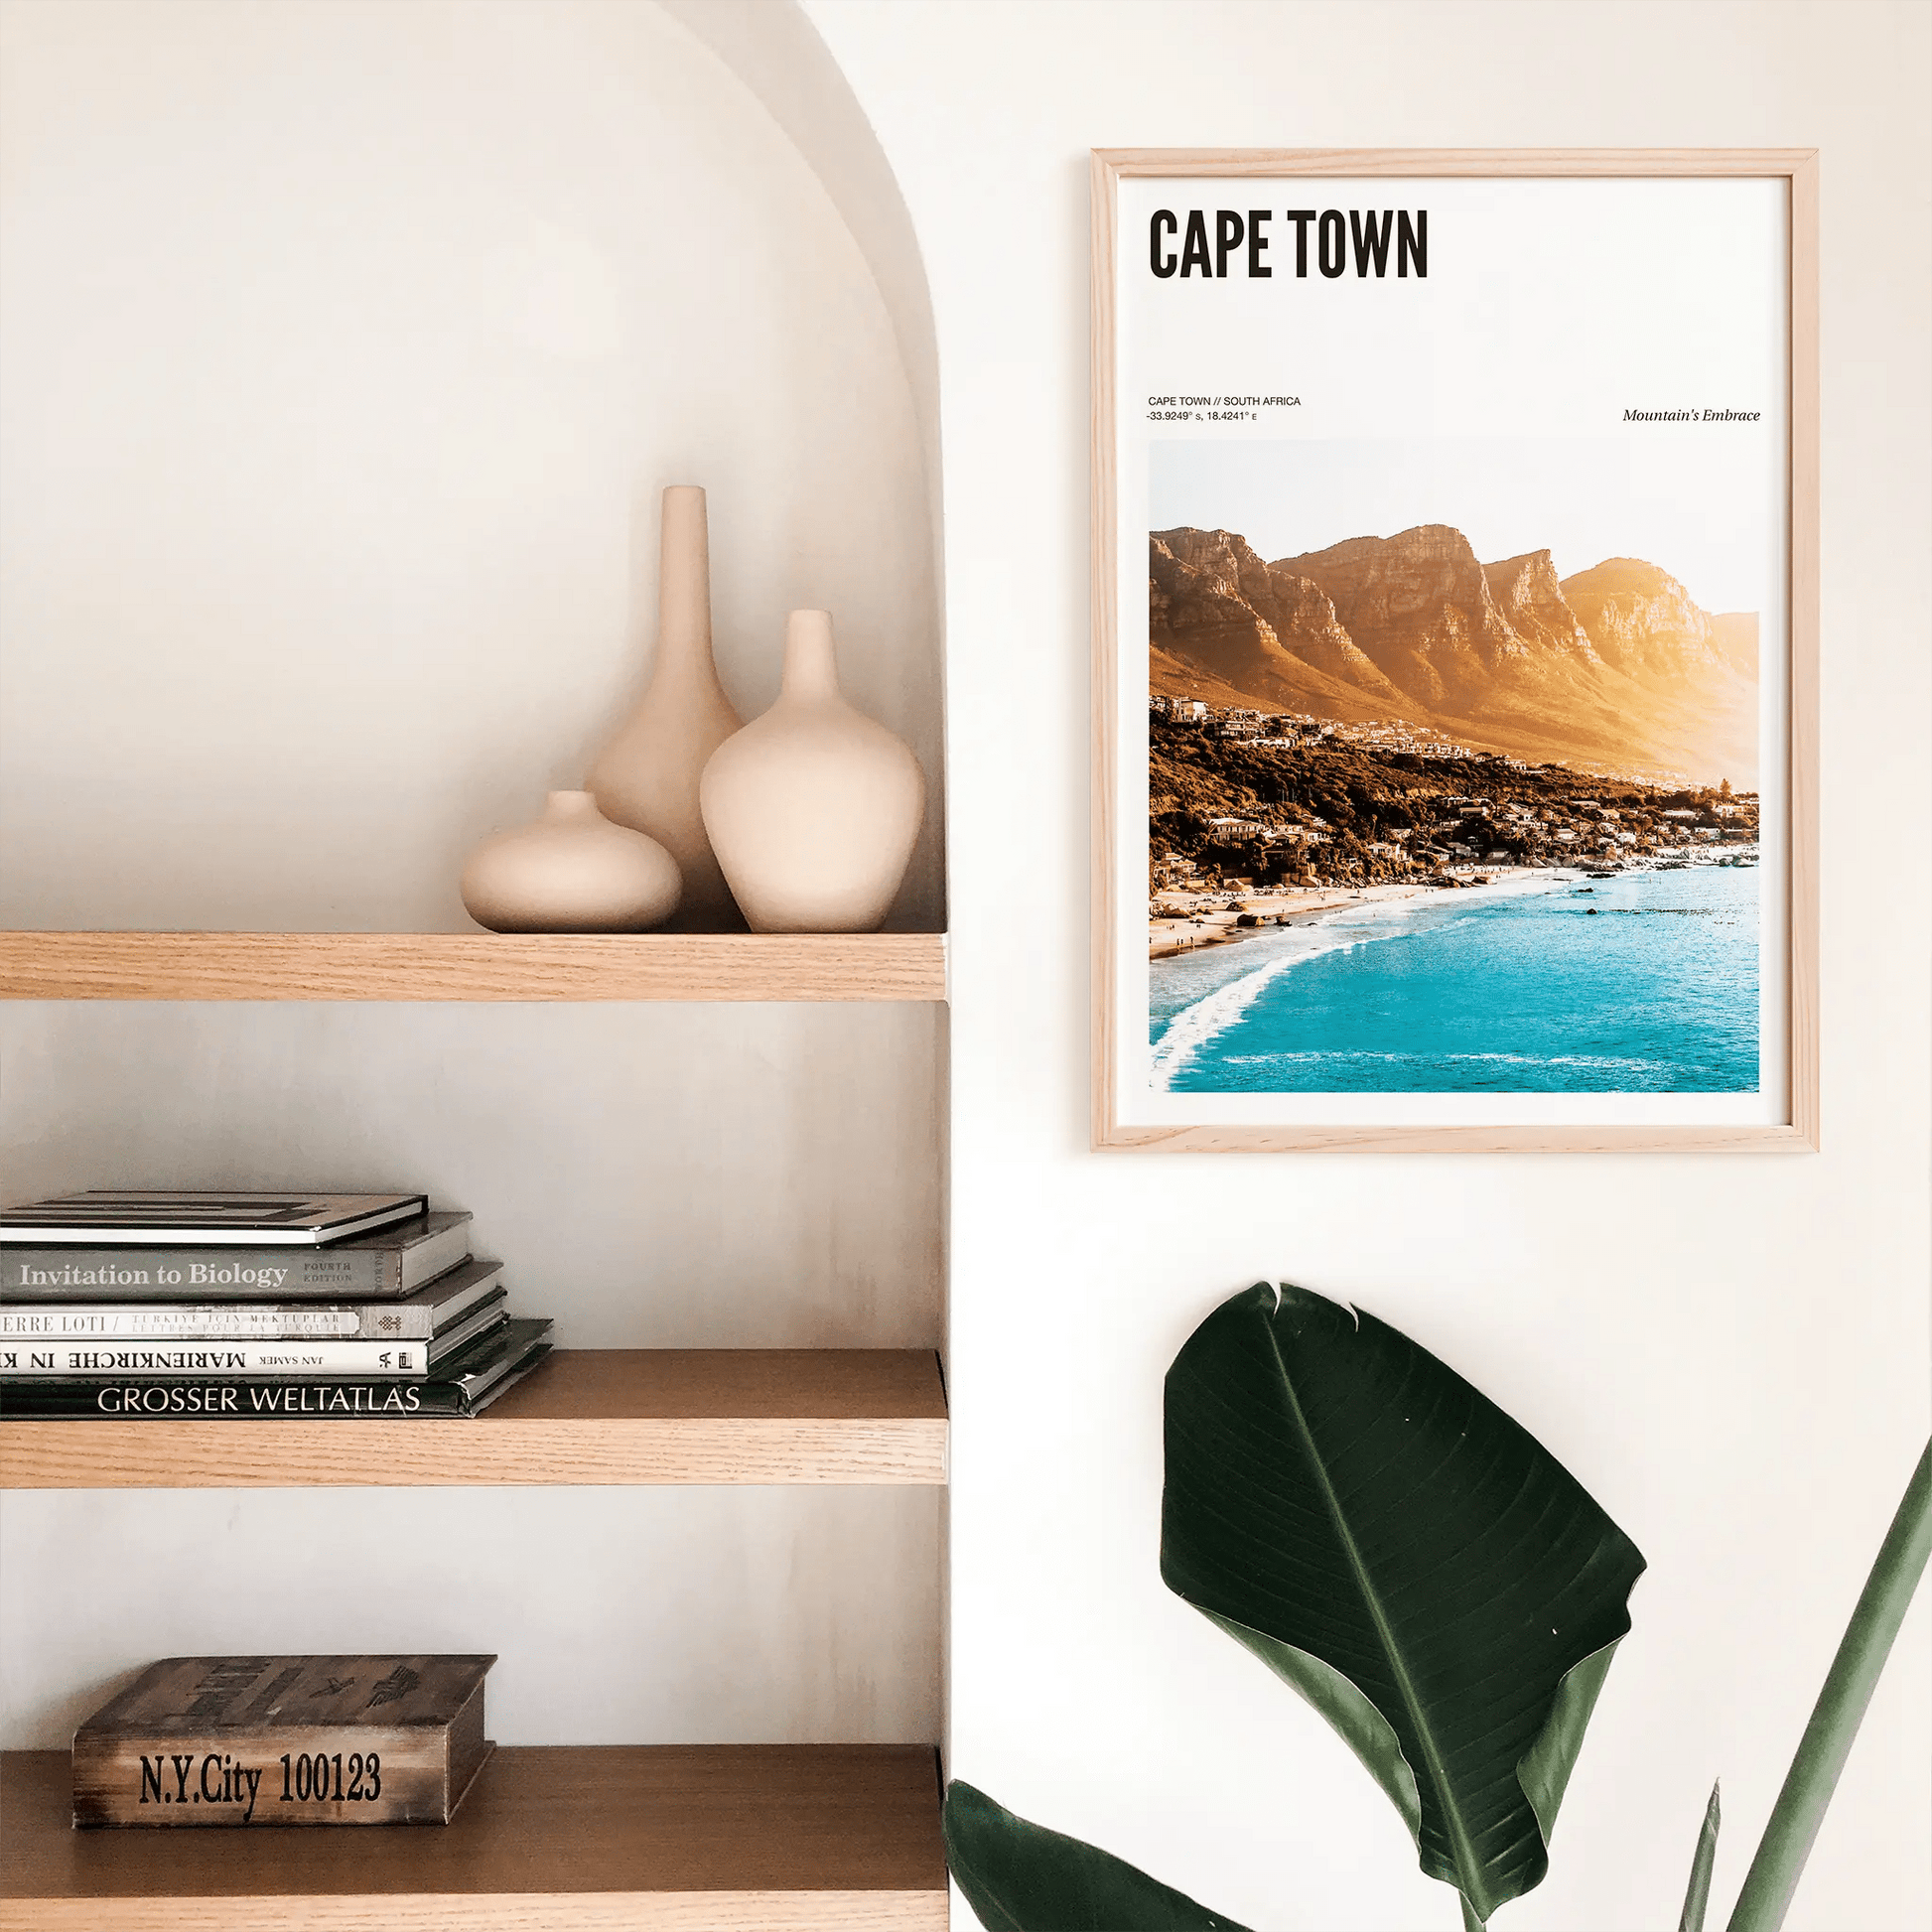 Cape Town Odyssey Poster - The Globe Gallery